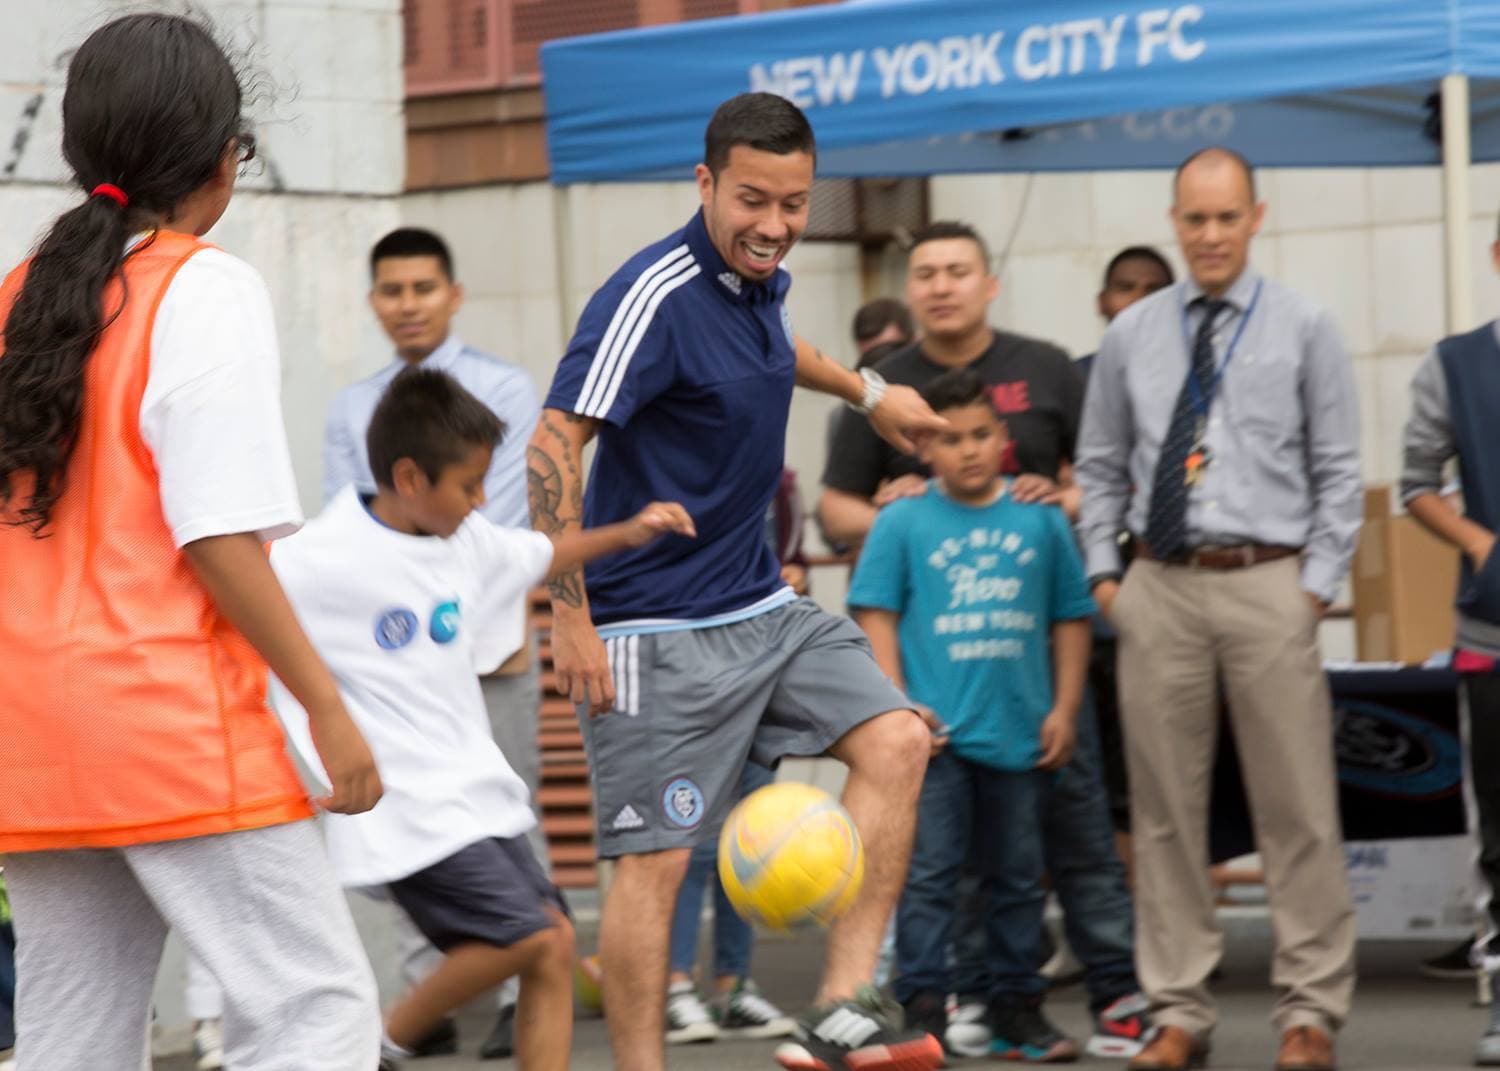 Thousands of deserving kids benefitted from soccer fields that have been constructed in Atlantic City, Dallas, Washington, DC, New York City, East Los Angeles, Chicago and Miami as a key component of UAE’s community efforts in the US. http://uaeusaunited.com/story/community-soccer.